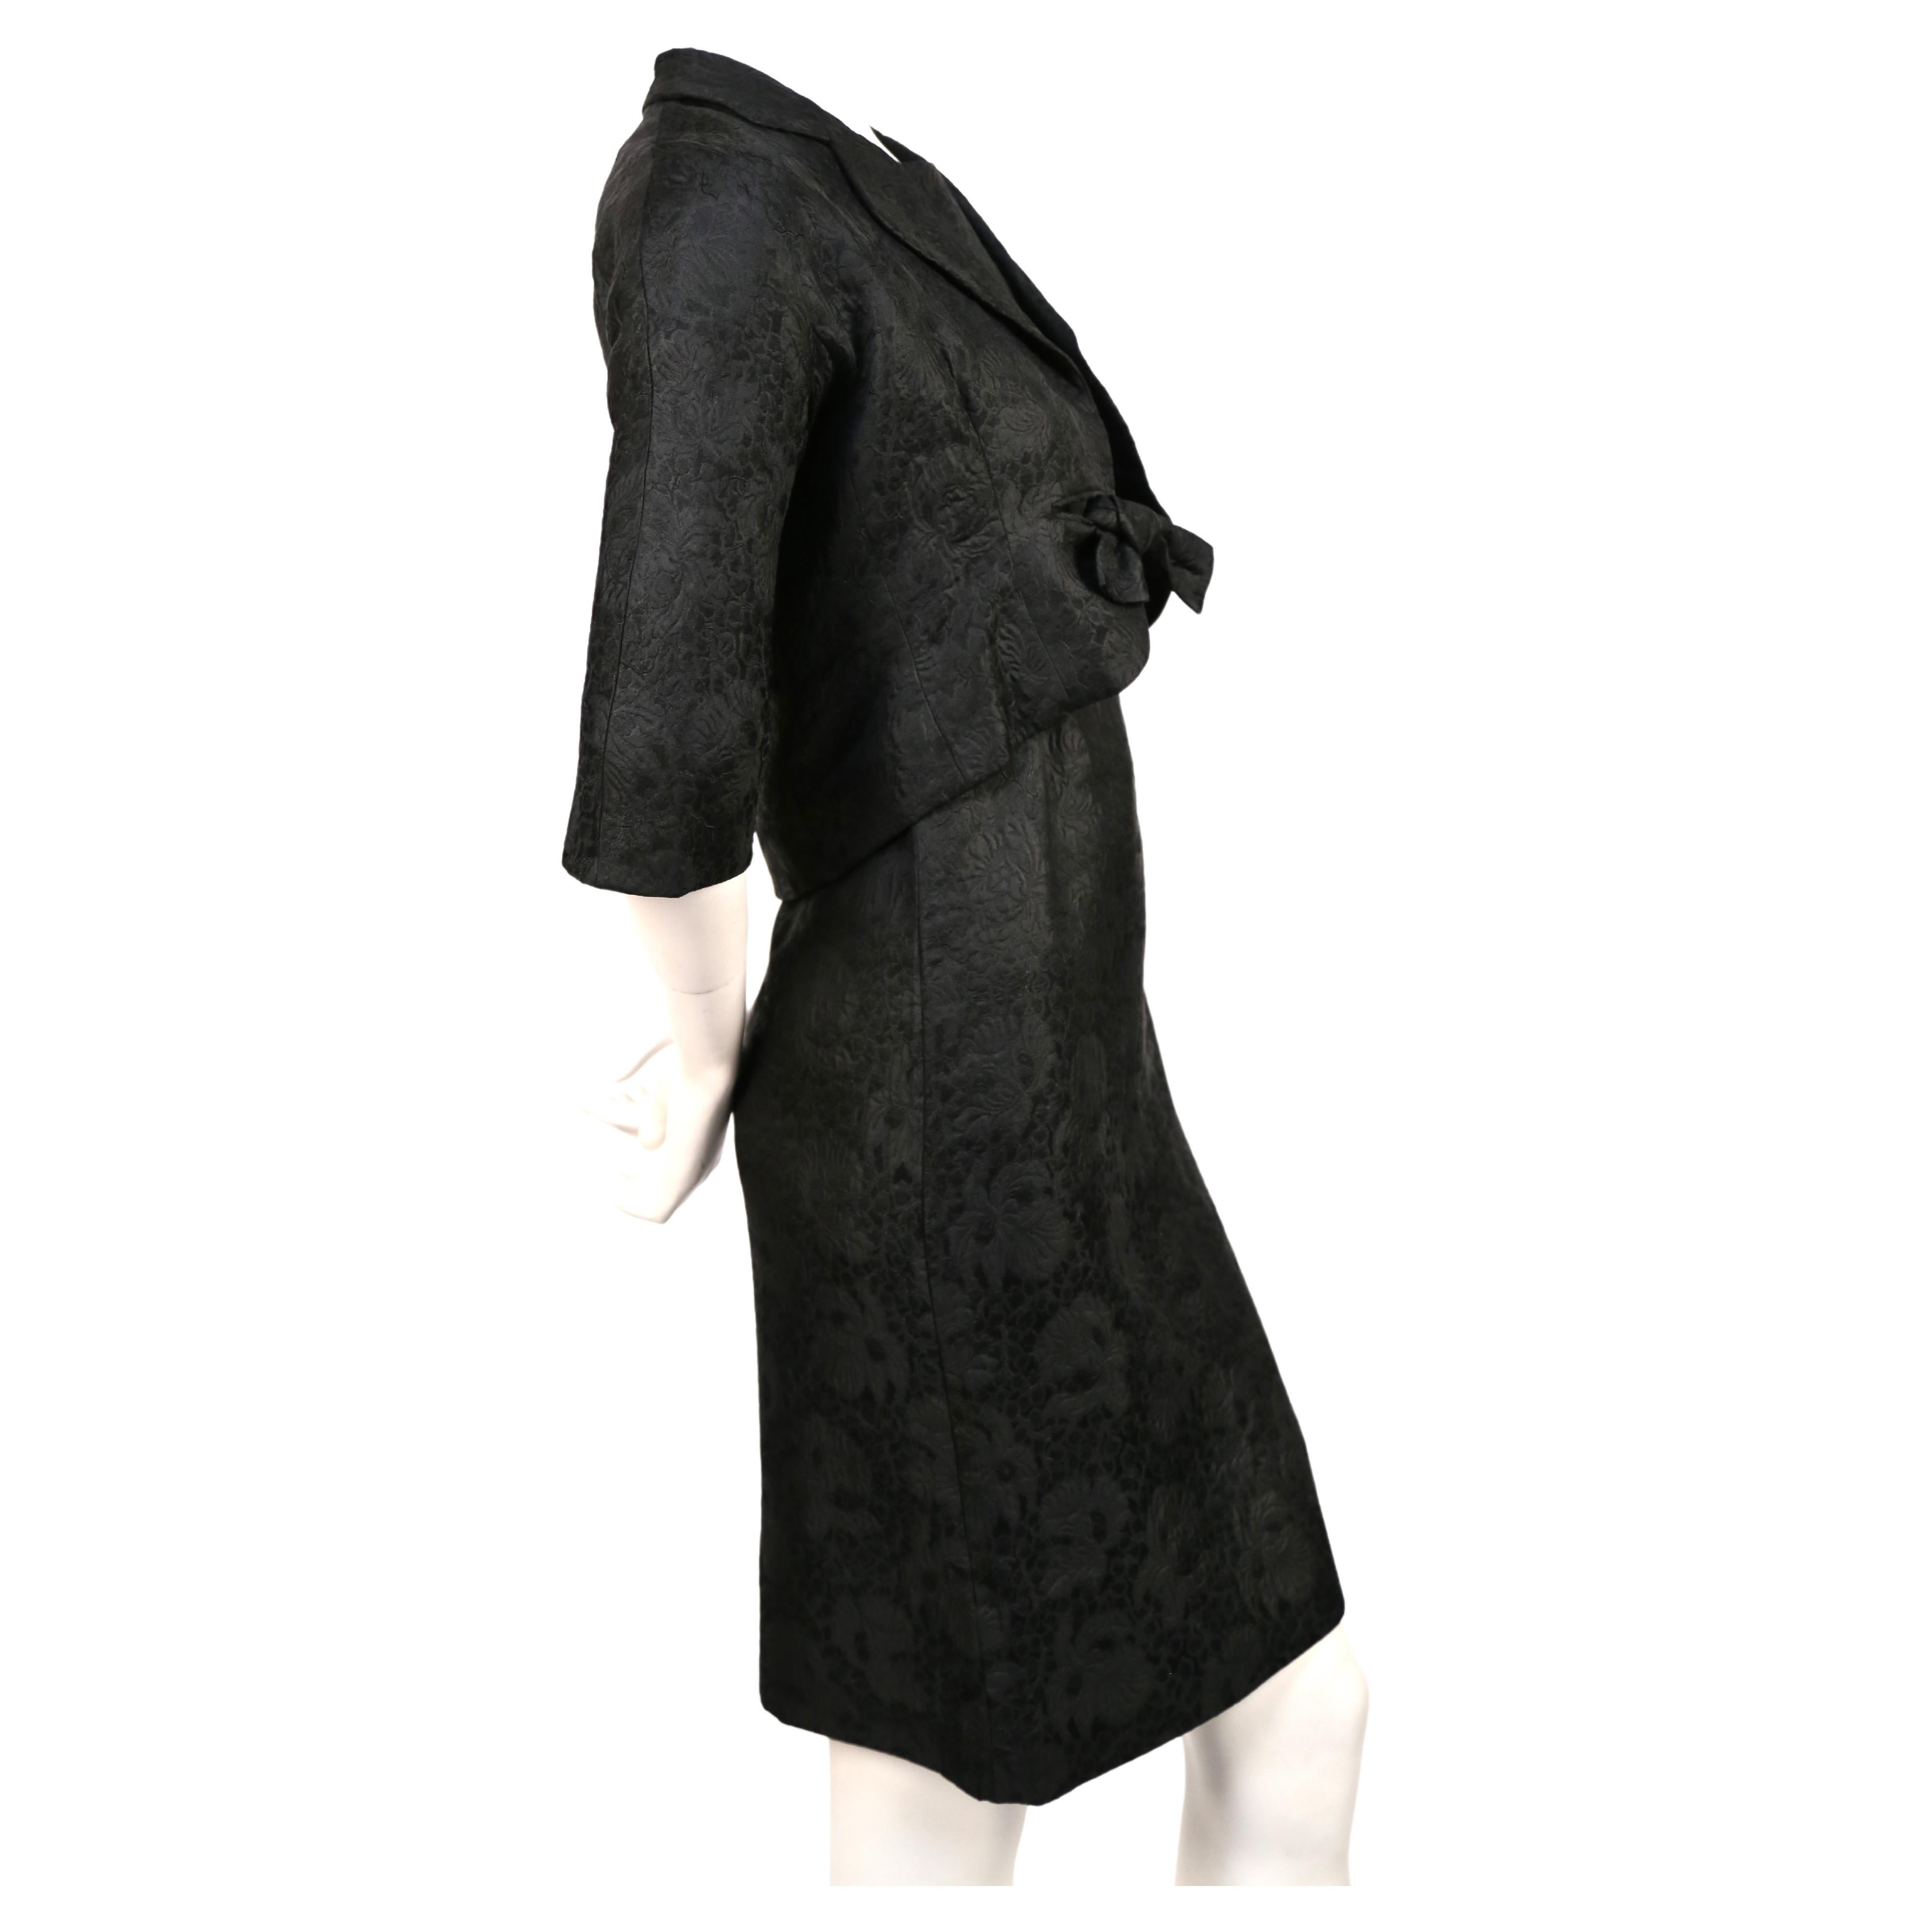 1960's Cristóbal Balenciaga haute couture black brocade dress and jacket In Good Condition For Sale In San Fransisco, CA